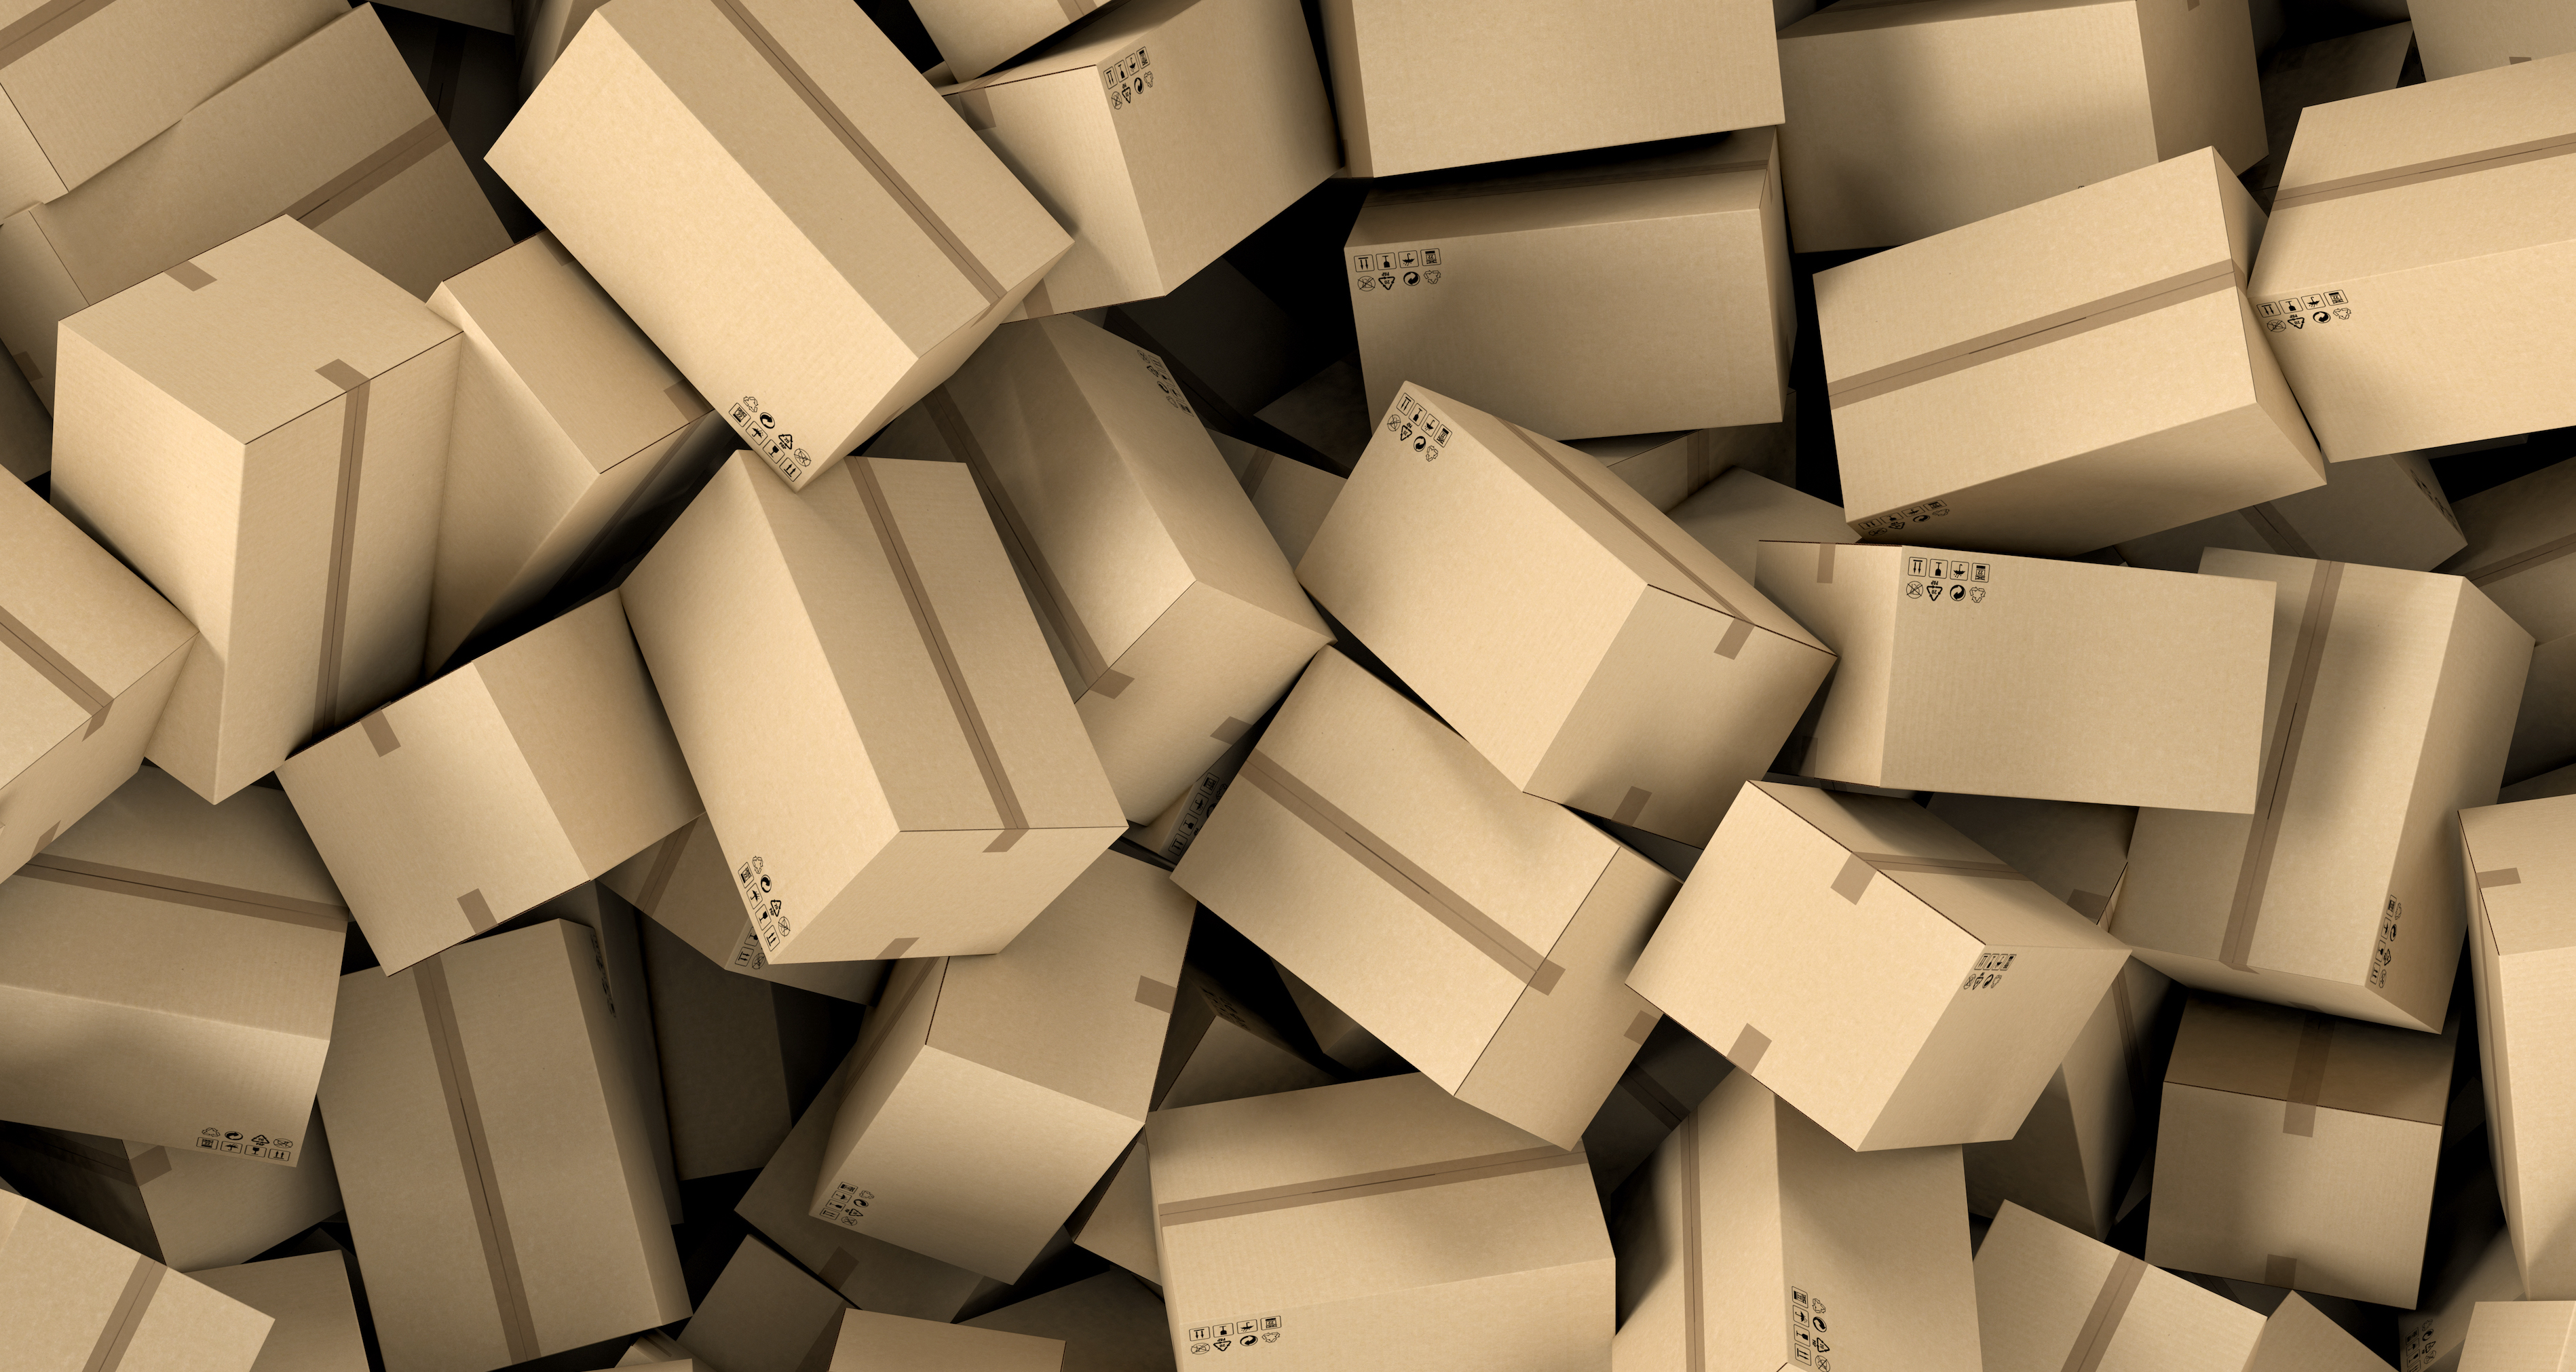 3d rendering of a huge amount of cardboard boxes lying together in disorder, top view. Postal services. Packing and crating. Storage of products. Compartments for packages.